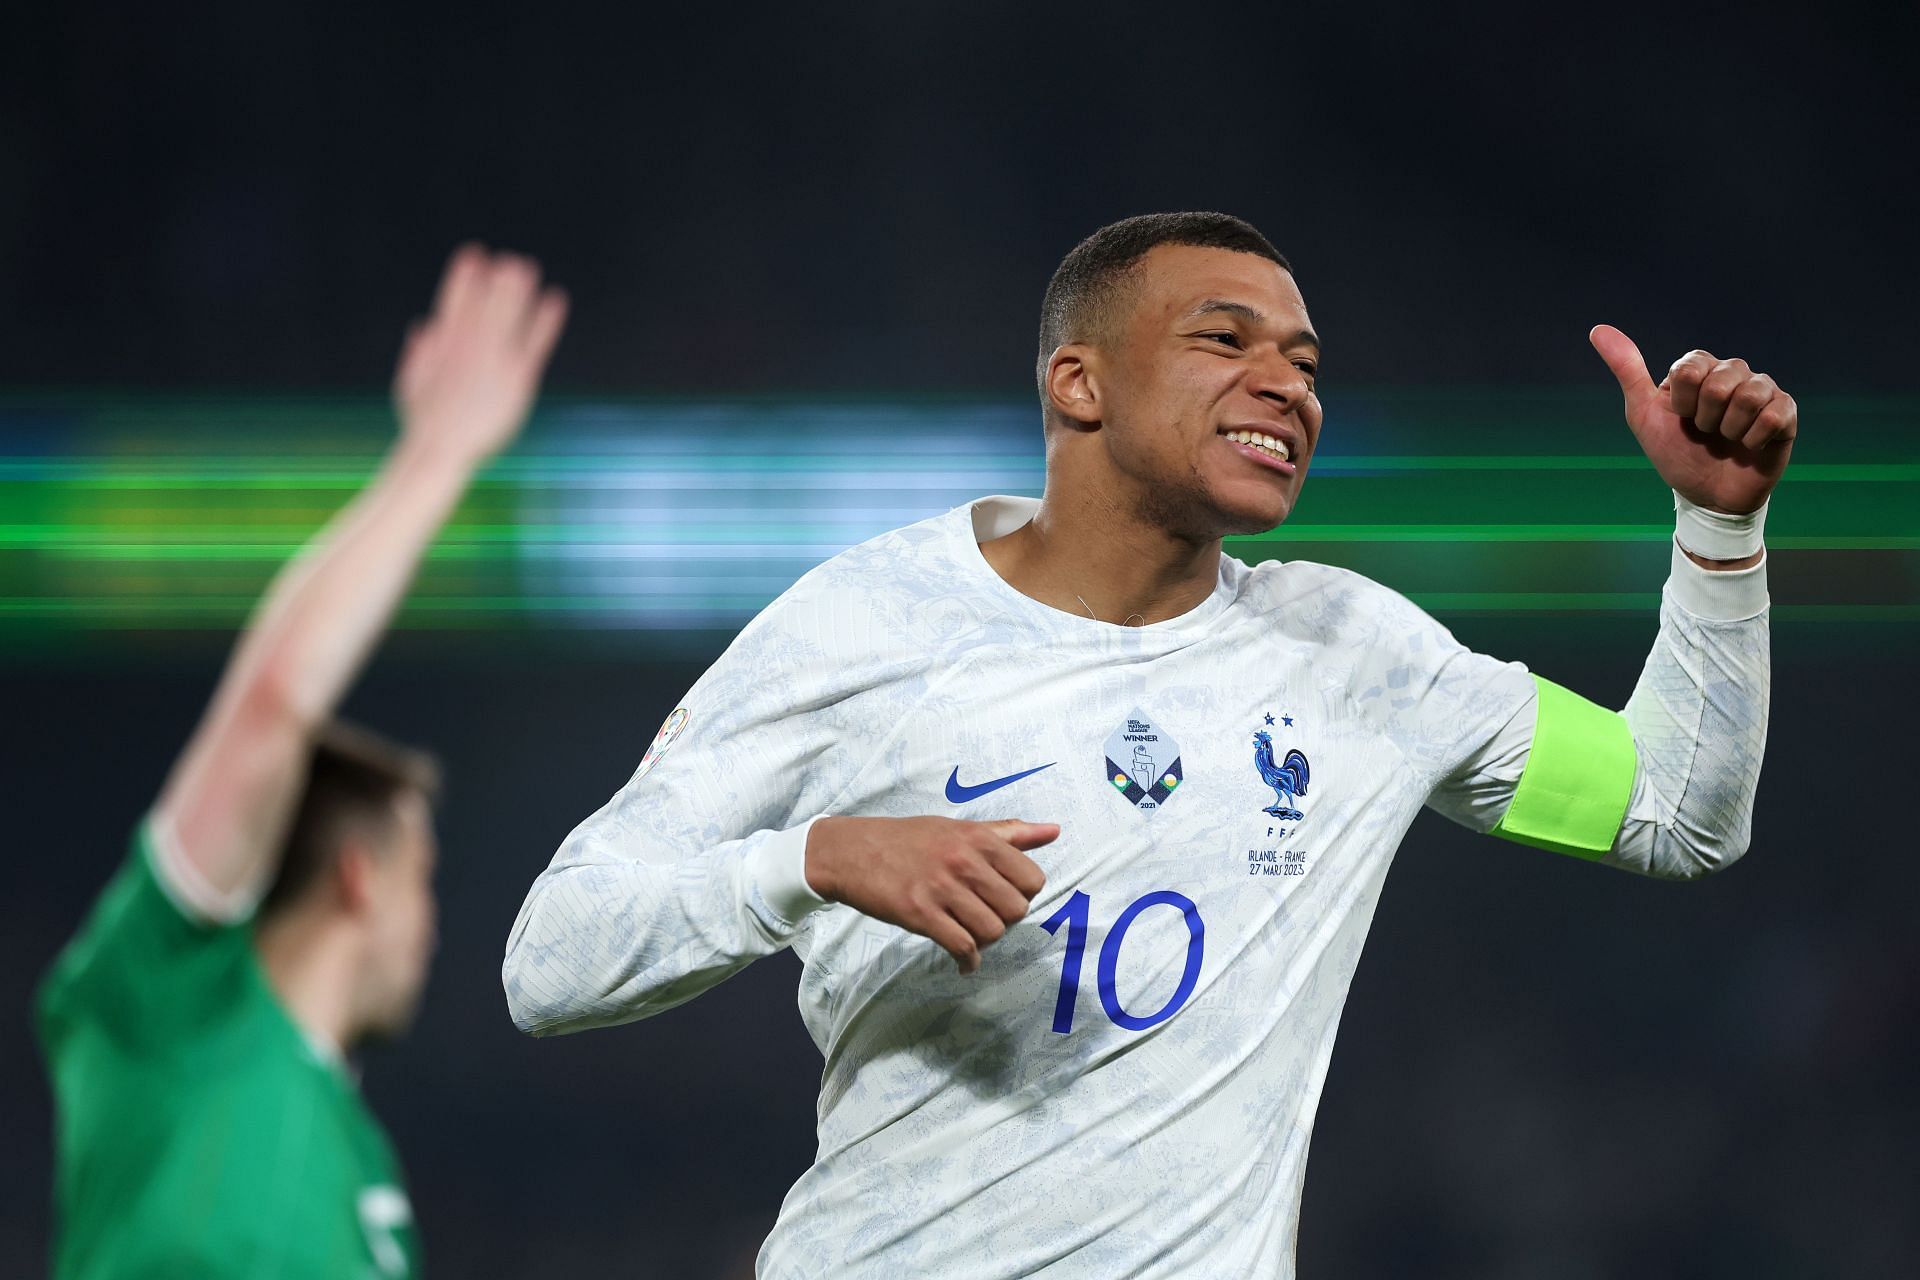 Kylian Mbappe reacted strongly to a recent promotional video.